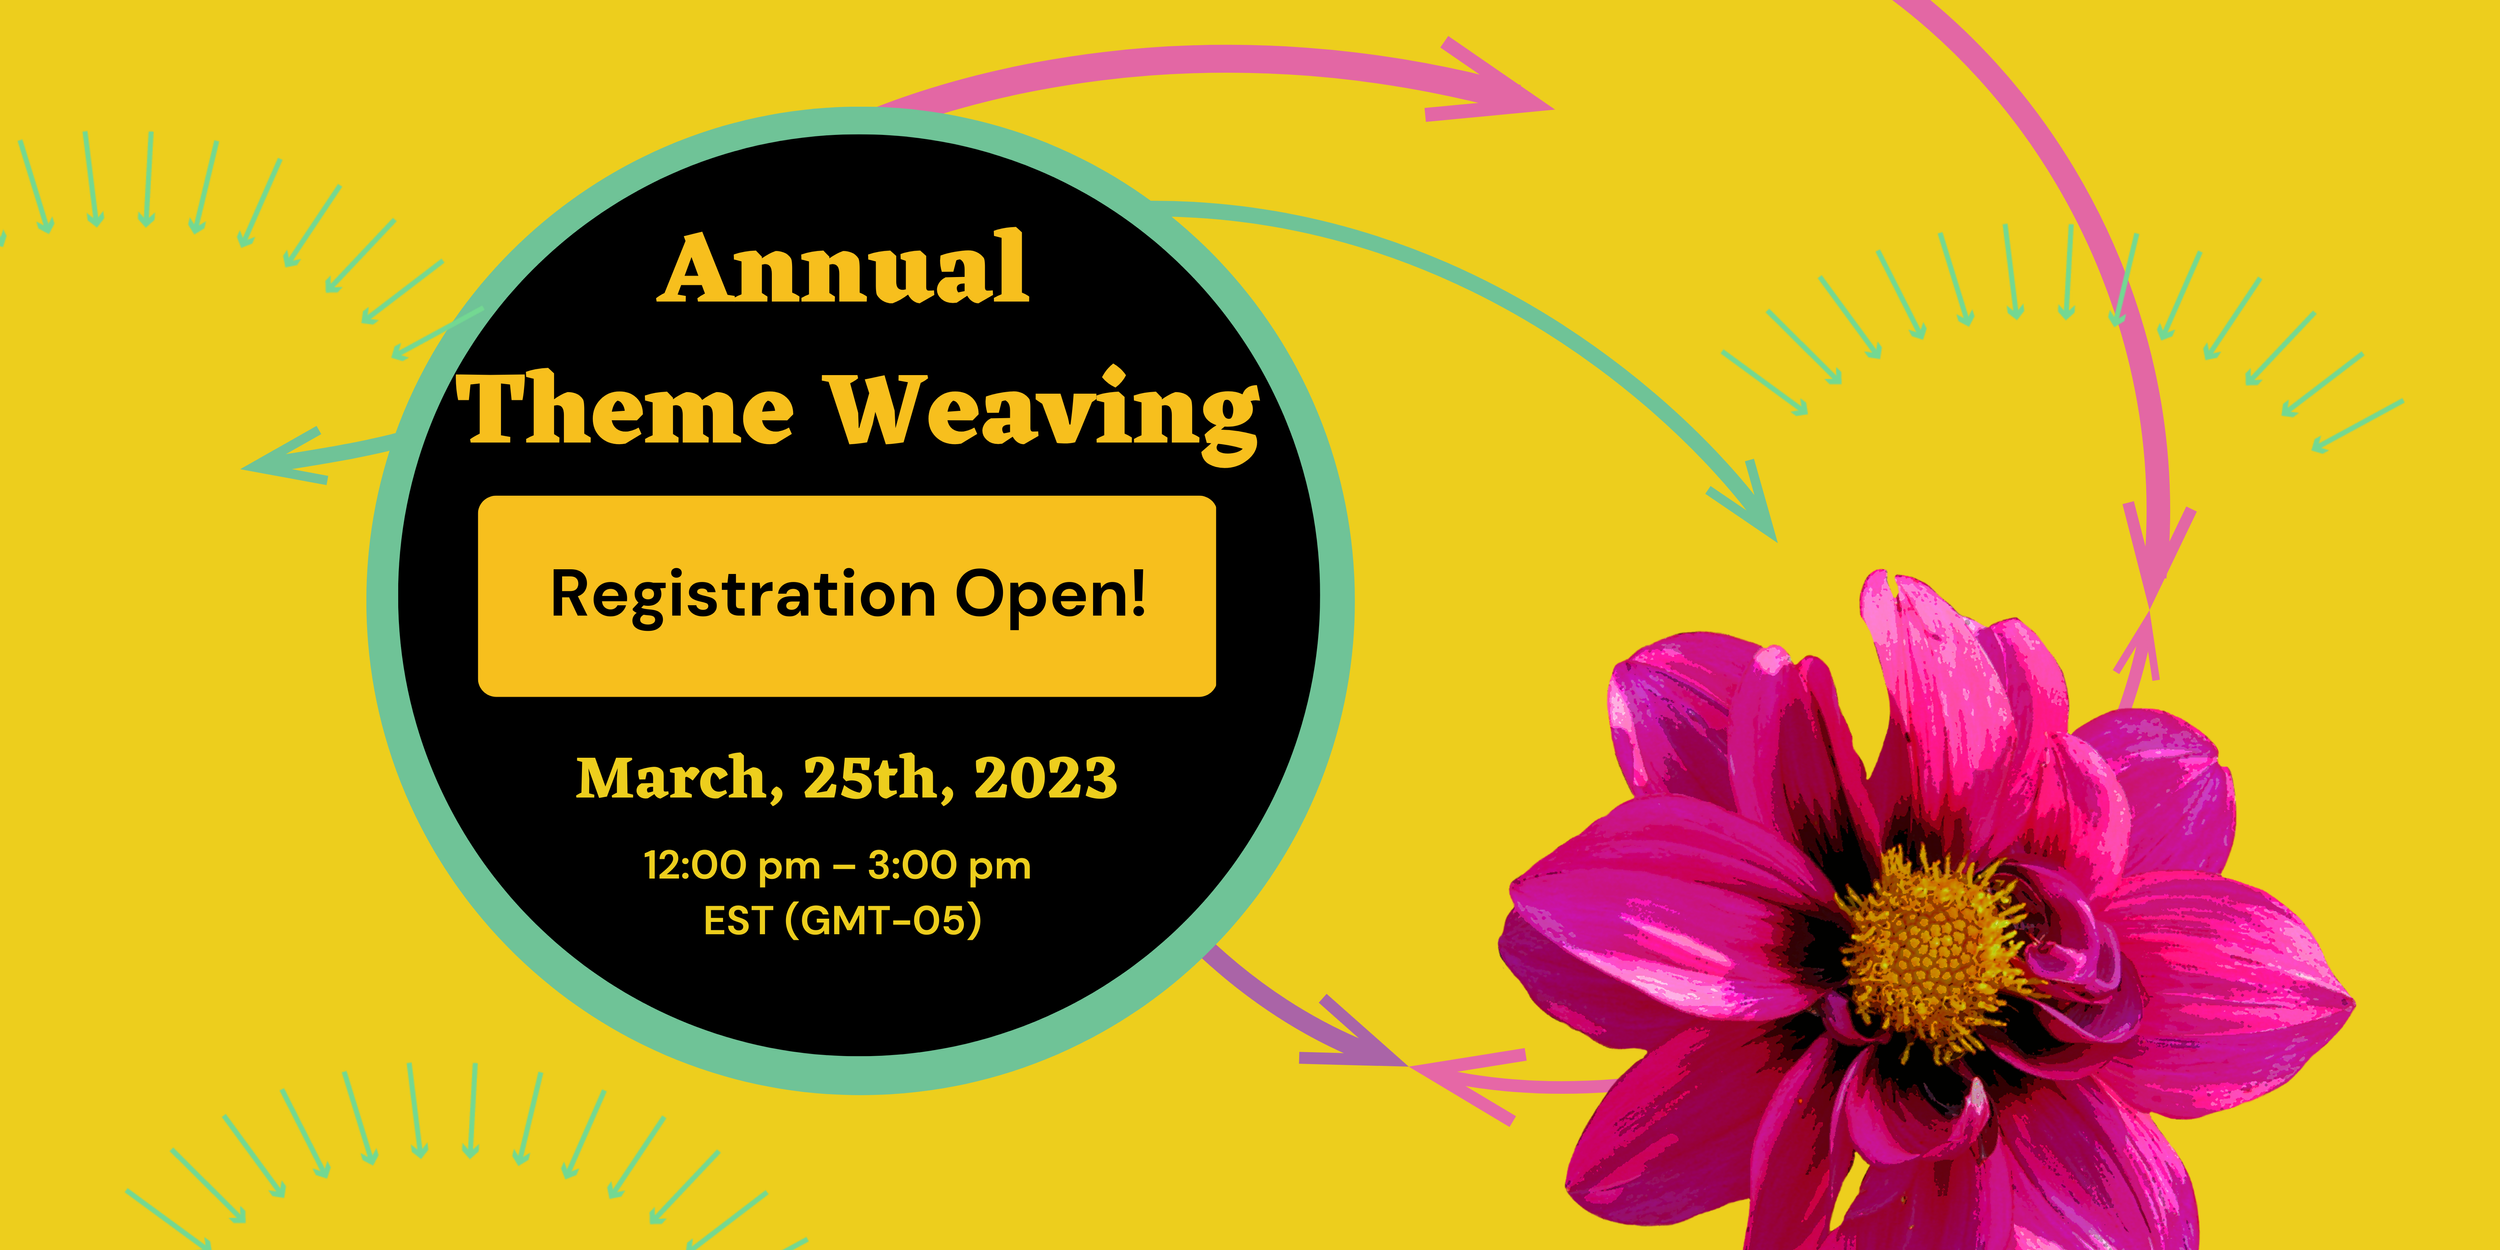 Register now! DJN: Inaugural Theme-Weaving, Saturday March 25th